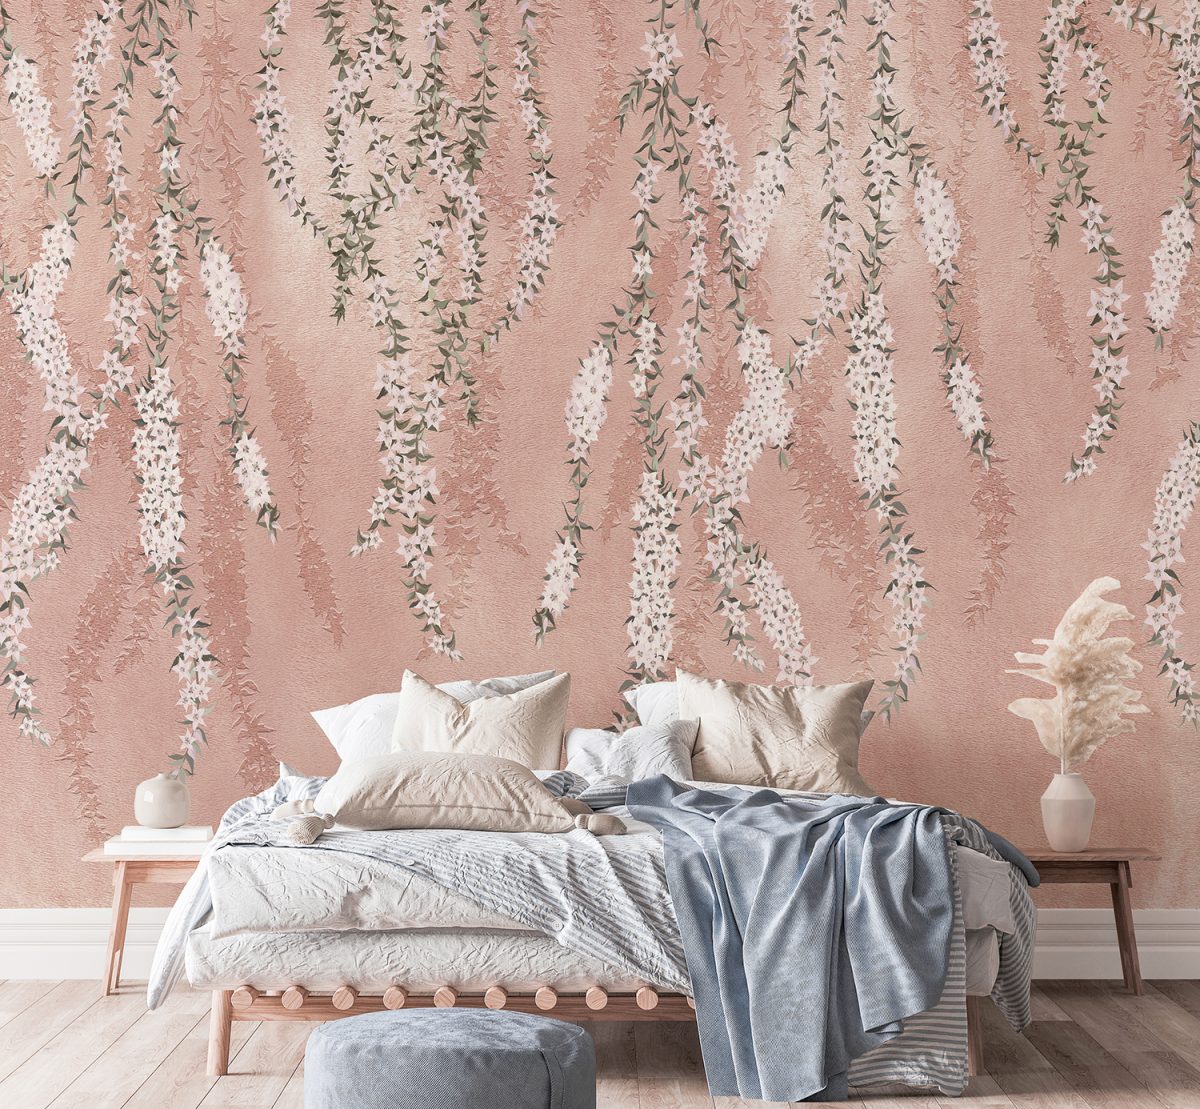 The Best Places to Buy Wallpaper Online: 12 Shops We Love | Etsy